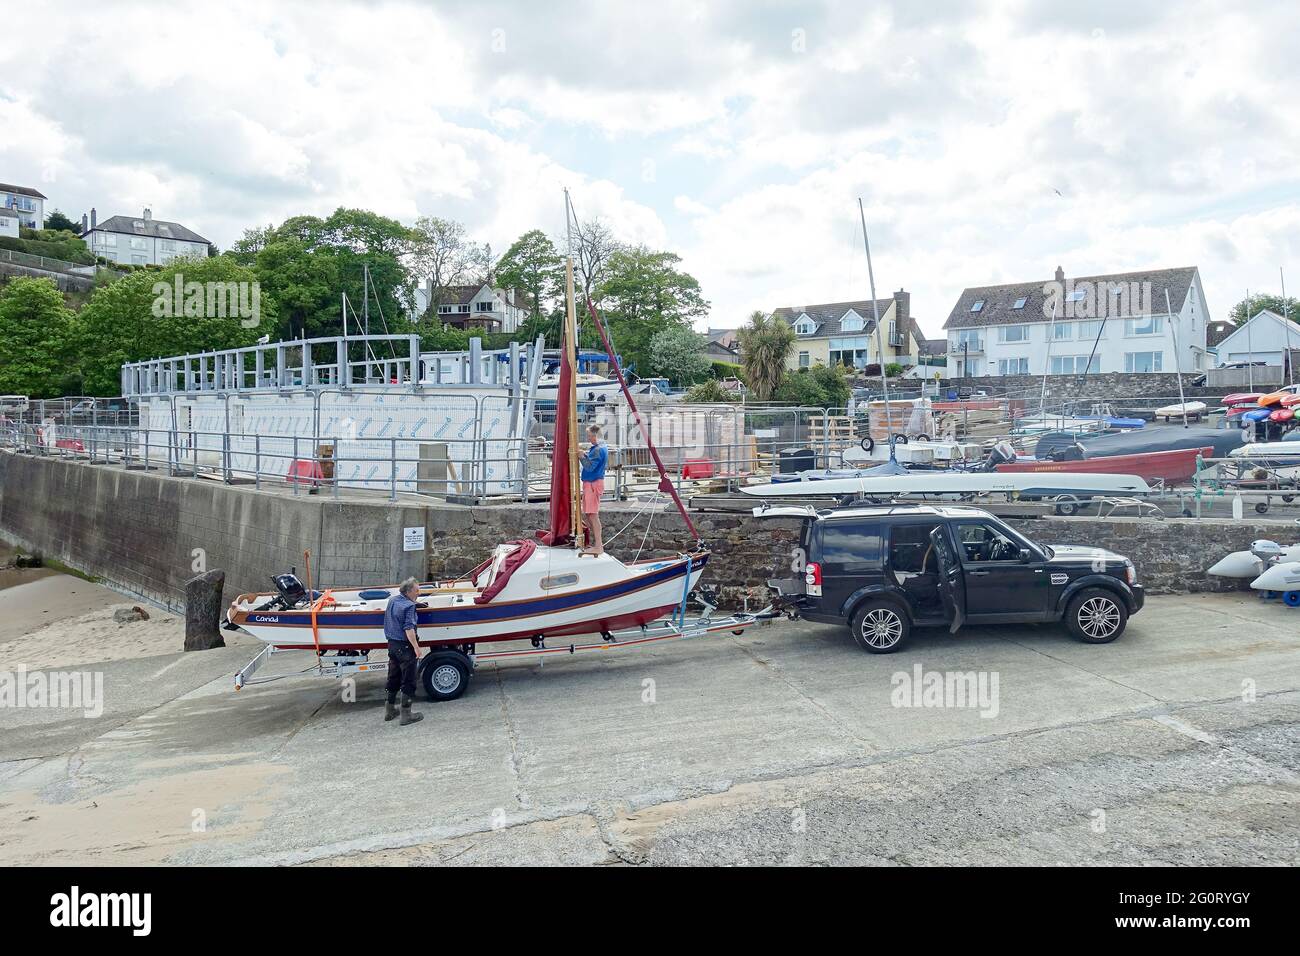 Boat launching, Saundersfoot Harbour, Pembrokeshire, Wales Stock Photo